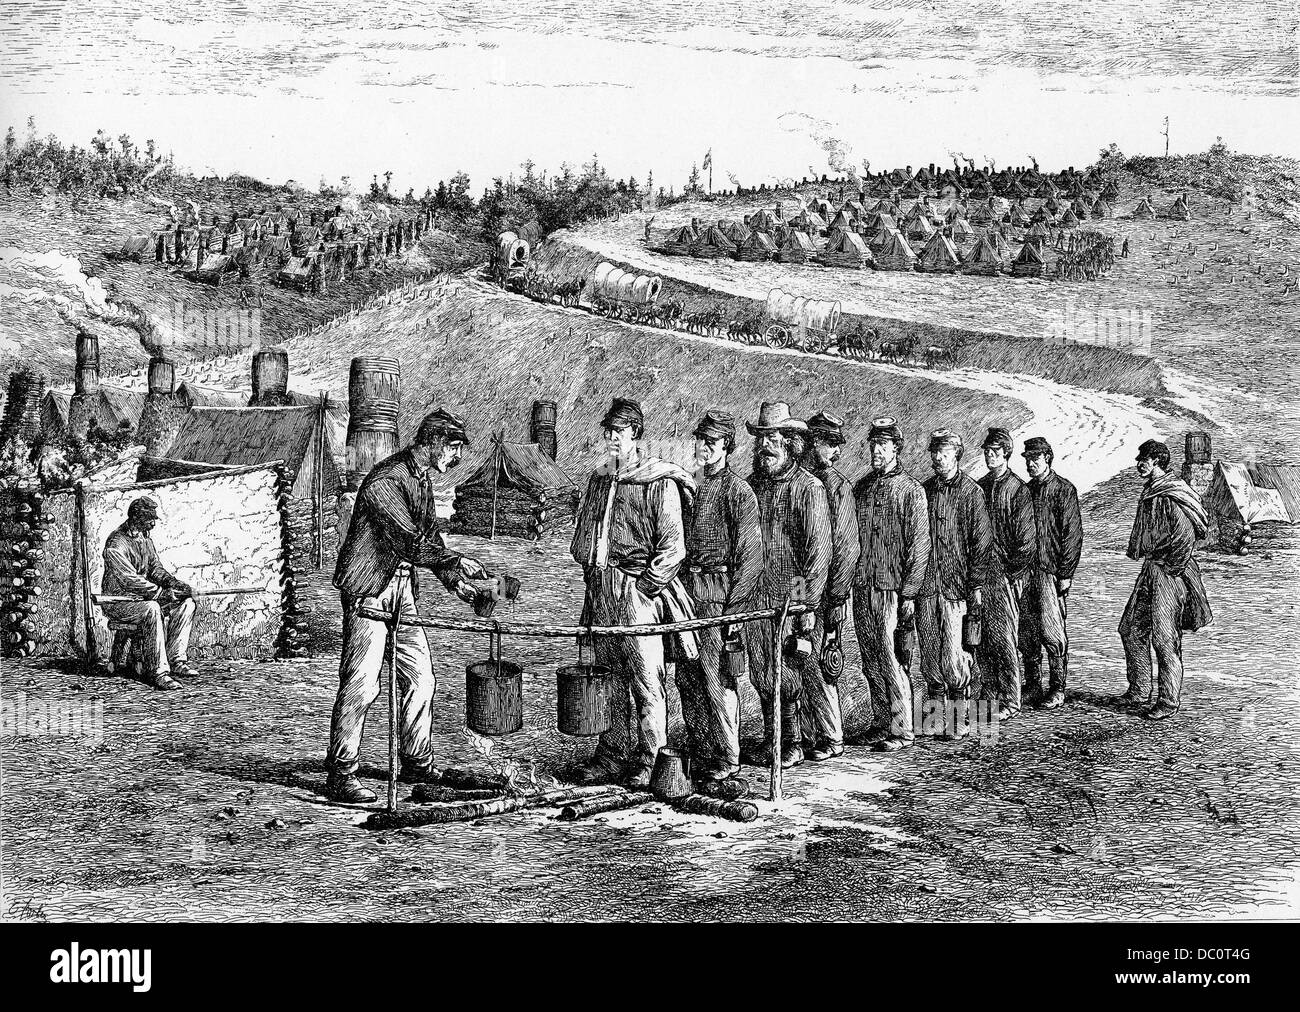 1800s 1860s ILLUSTRATION SOUP LINE OF UNIONS SOLDIERS WAITING TO FILL SOUP CUPS WAGONS TENTS ENCAMPMENT ON SURROUNDING HILLSIDES Stock Photo